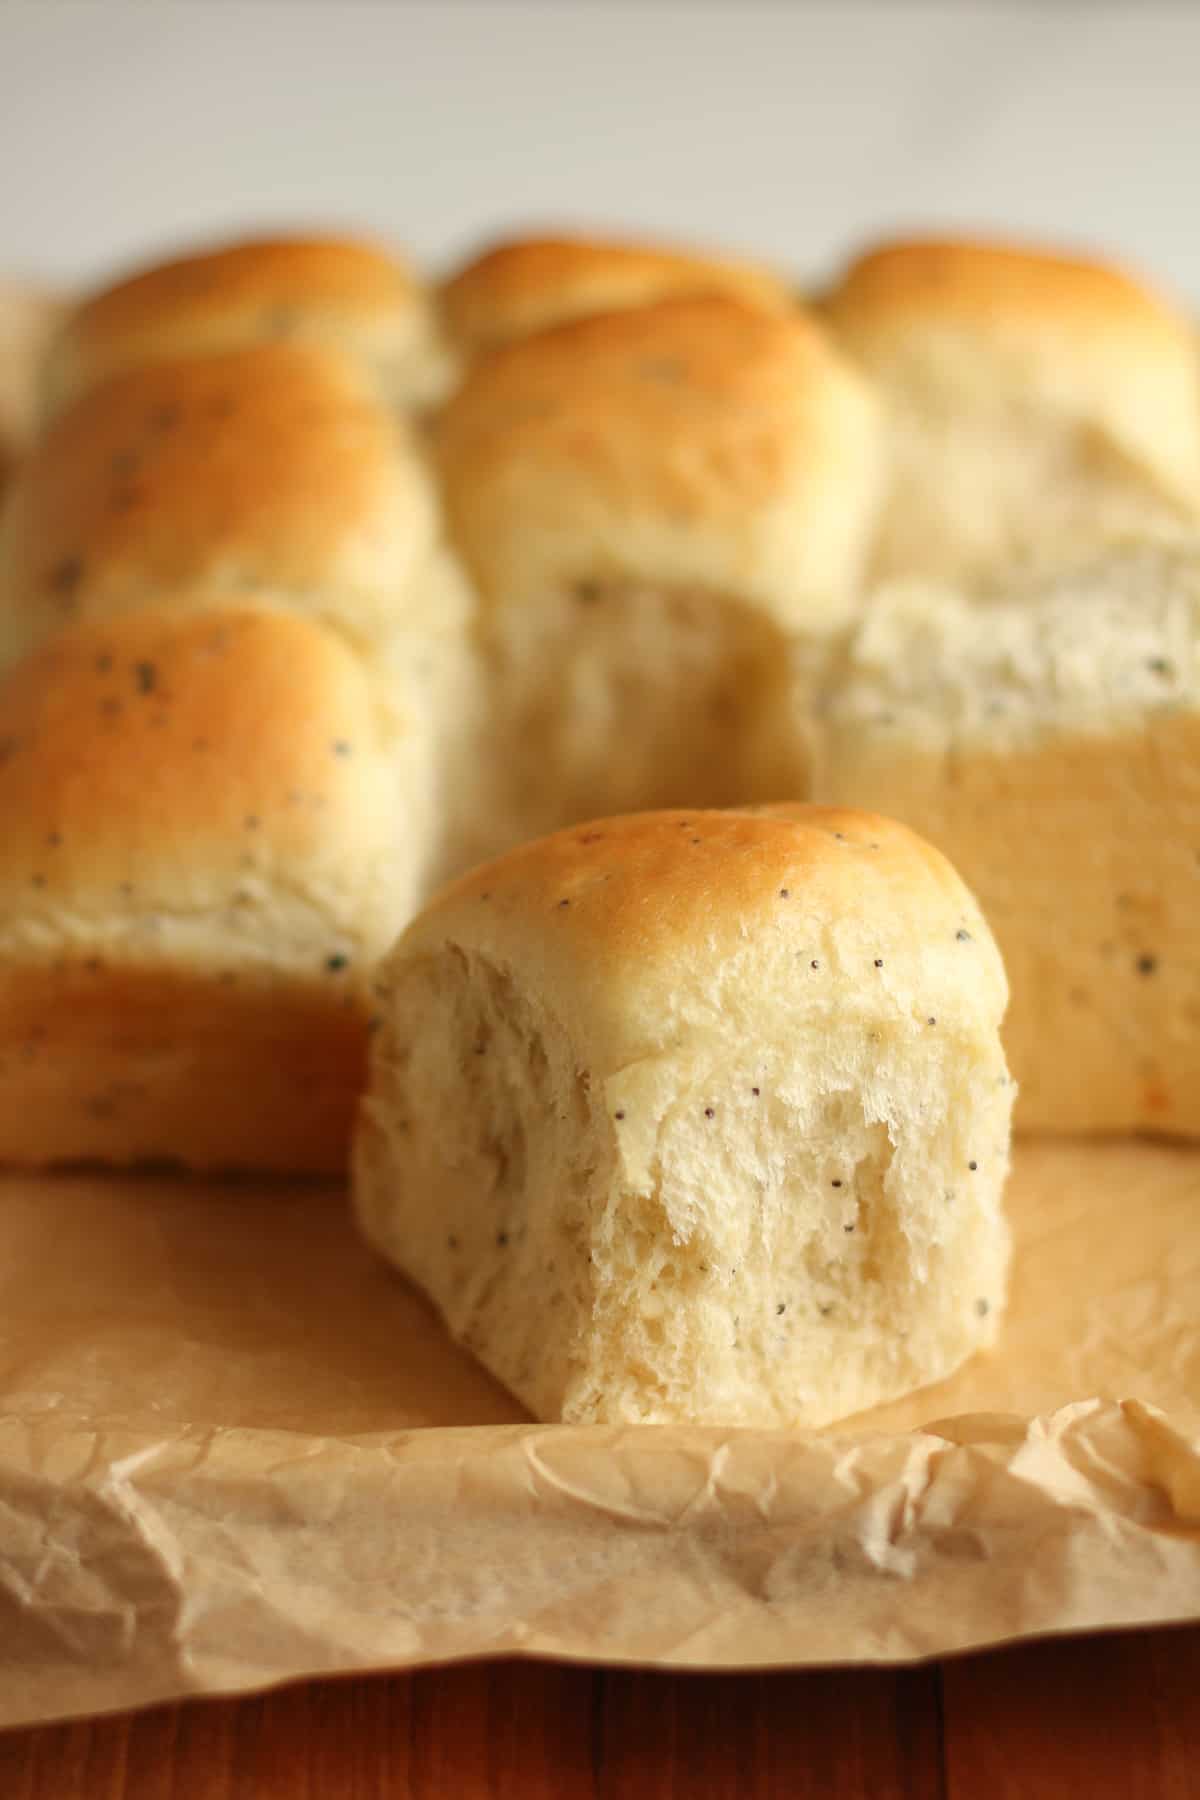 Side view of some dinner rolls, with a couple pulled apart.